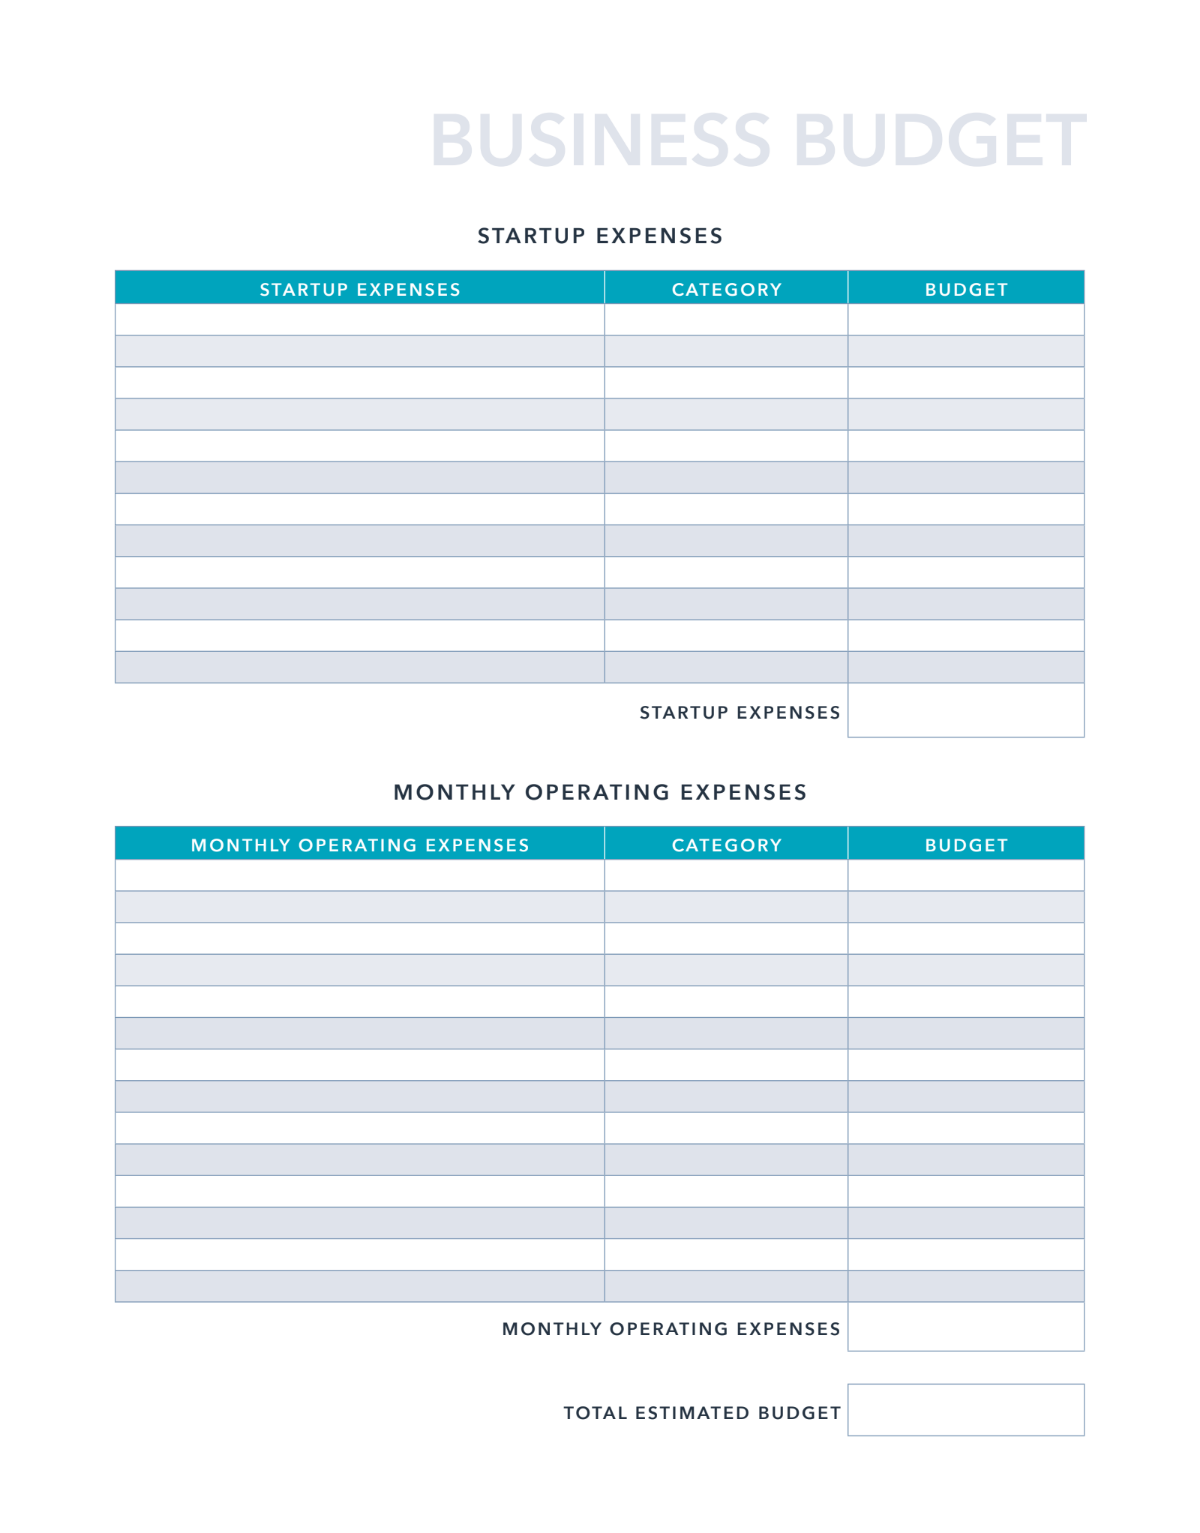 Free Business Budget Template for PDF  Excel  Google Sheets  For Startup Company Budget Template For Startup Company Budget Template